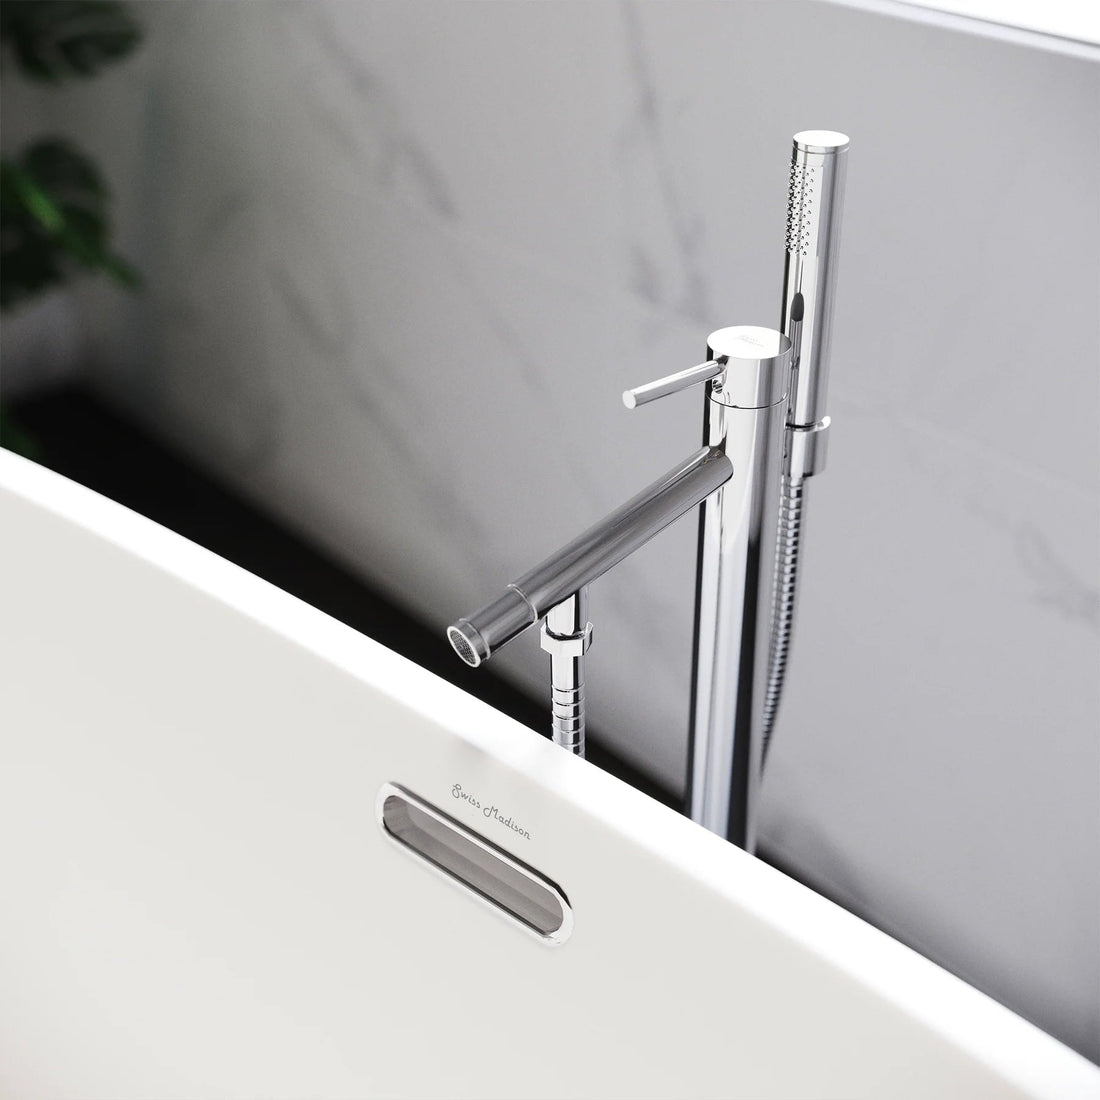 Discover the Best Bathtub Faucets for Your Renovation Project